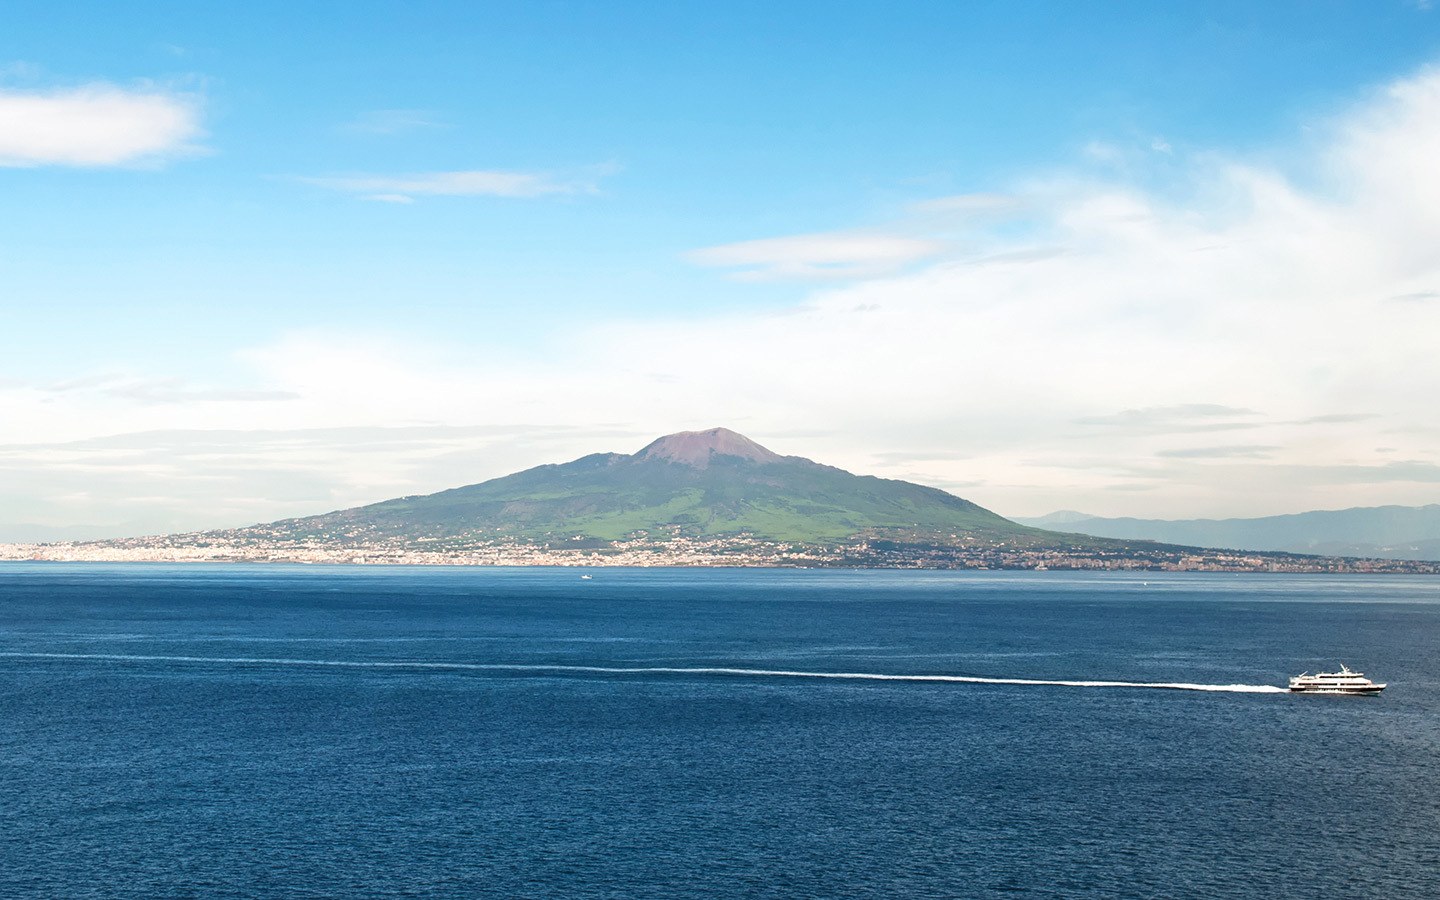 Mount Vesuvius in Southern Italy